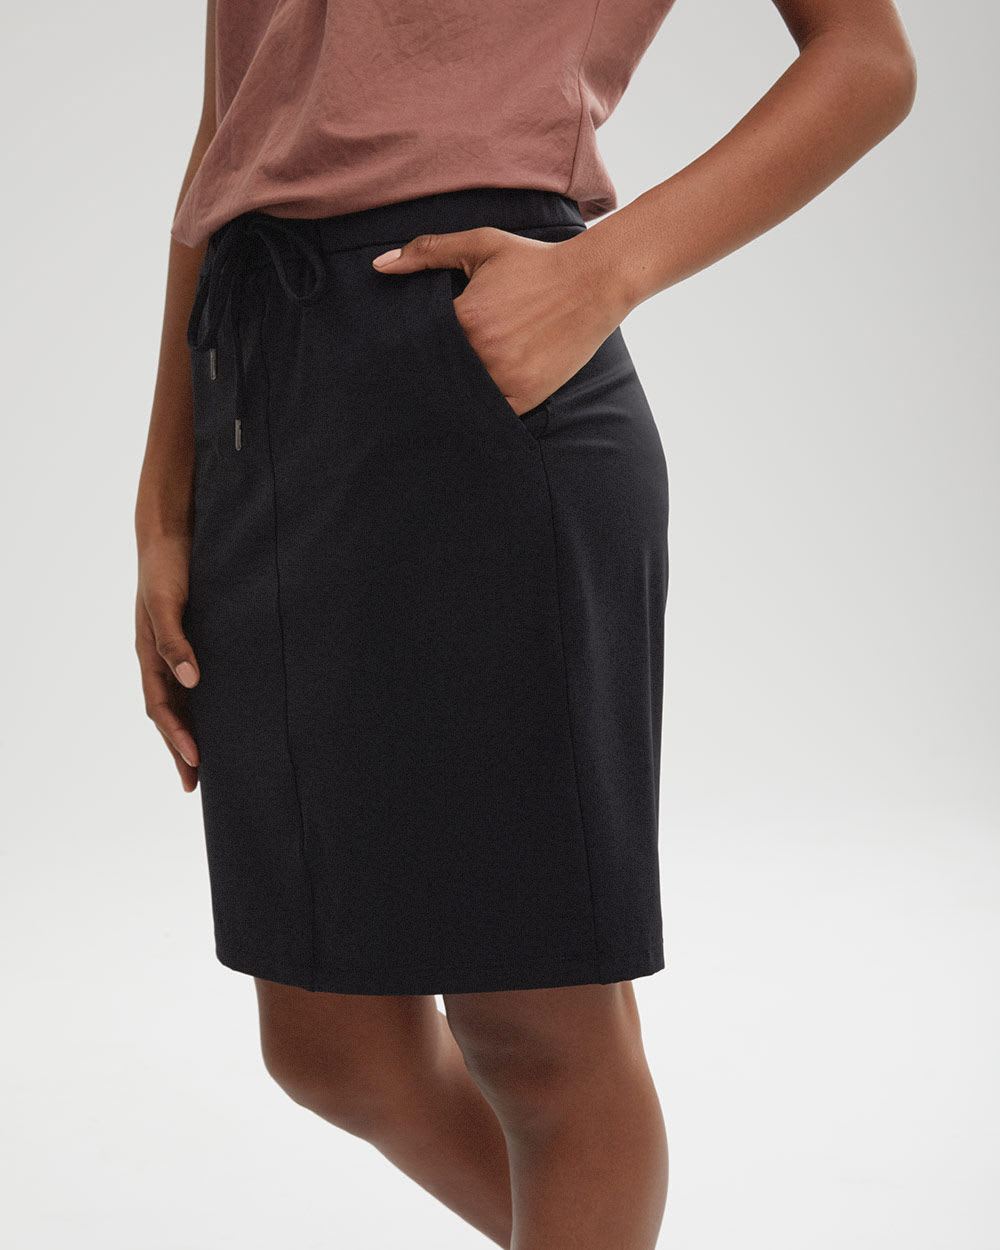 4-Way Stretch Knit Pull-On Skirt